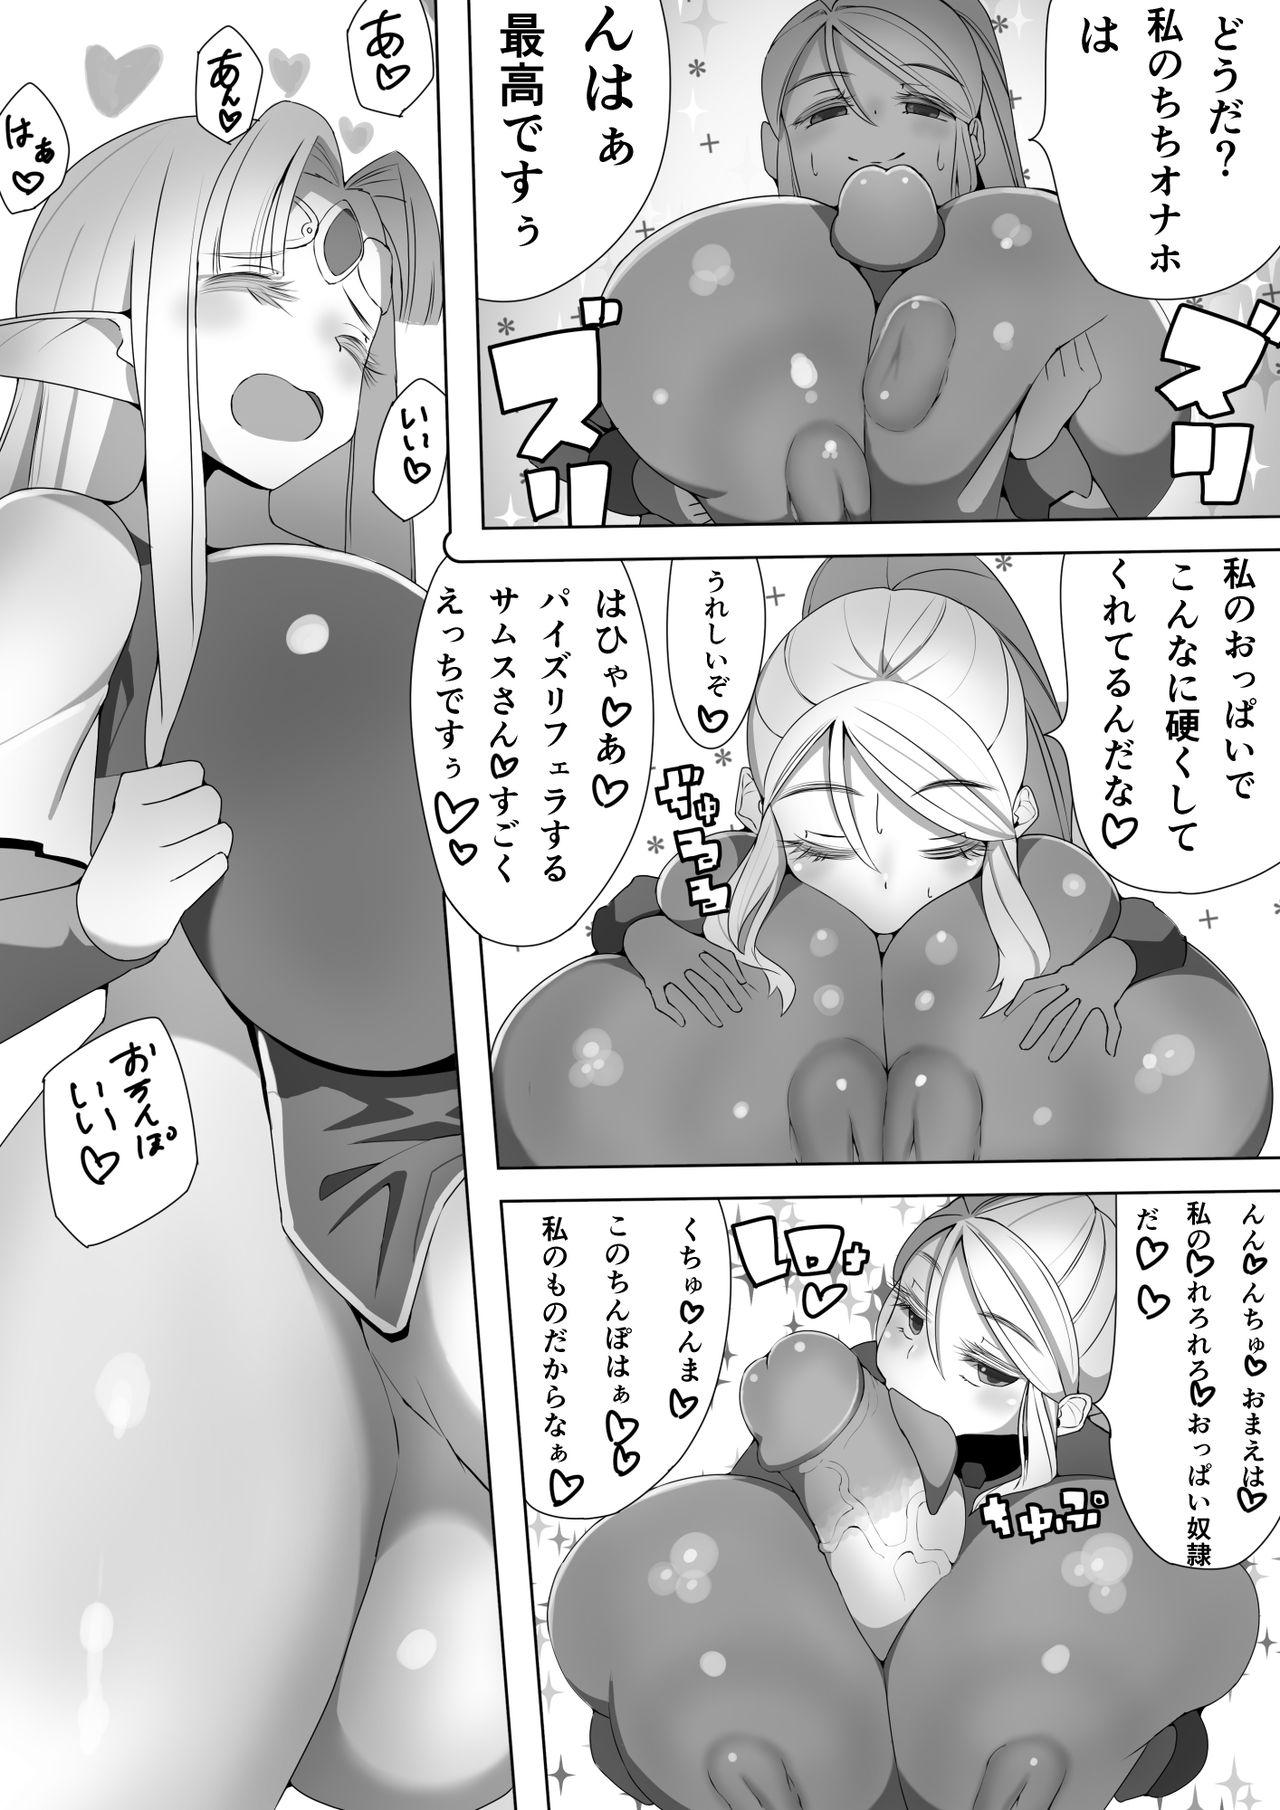 Big breasts Samus's Daily Life - The legend of zelda Metroid Lesbos - Page 9